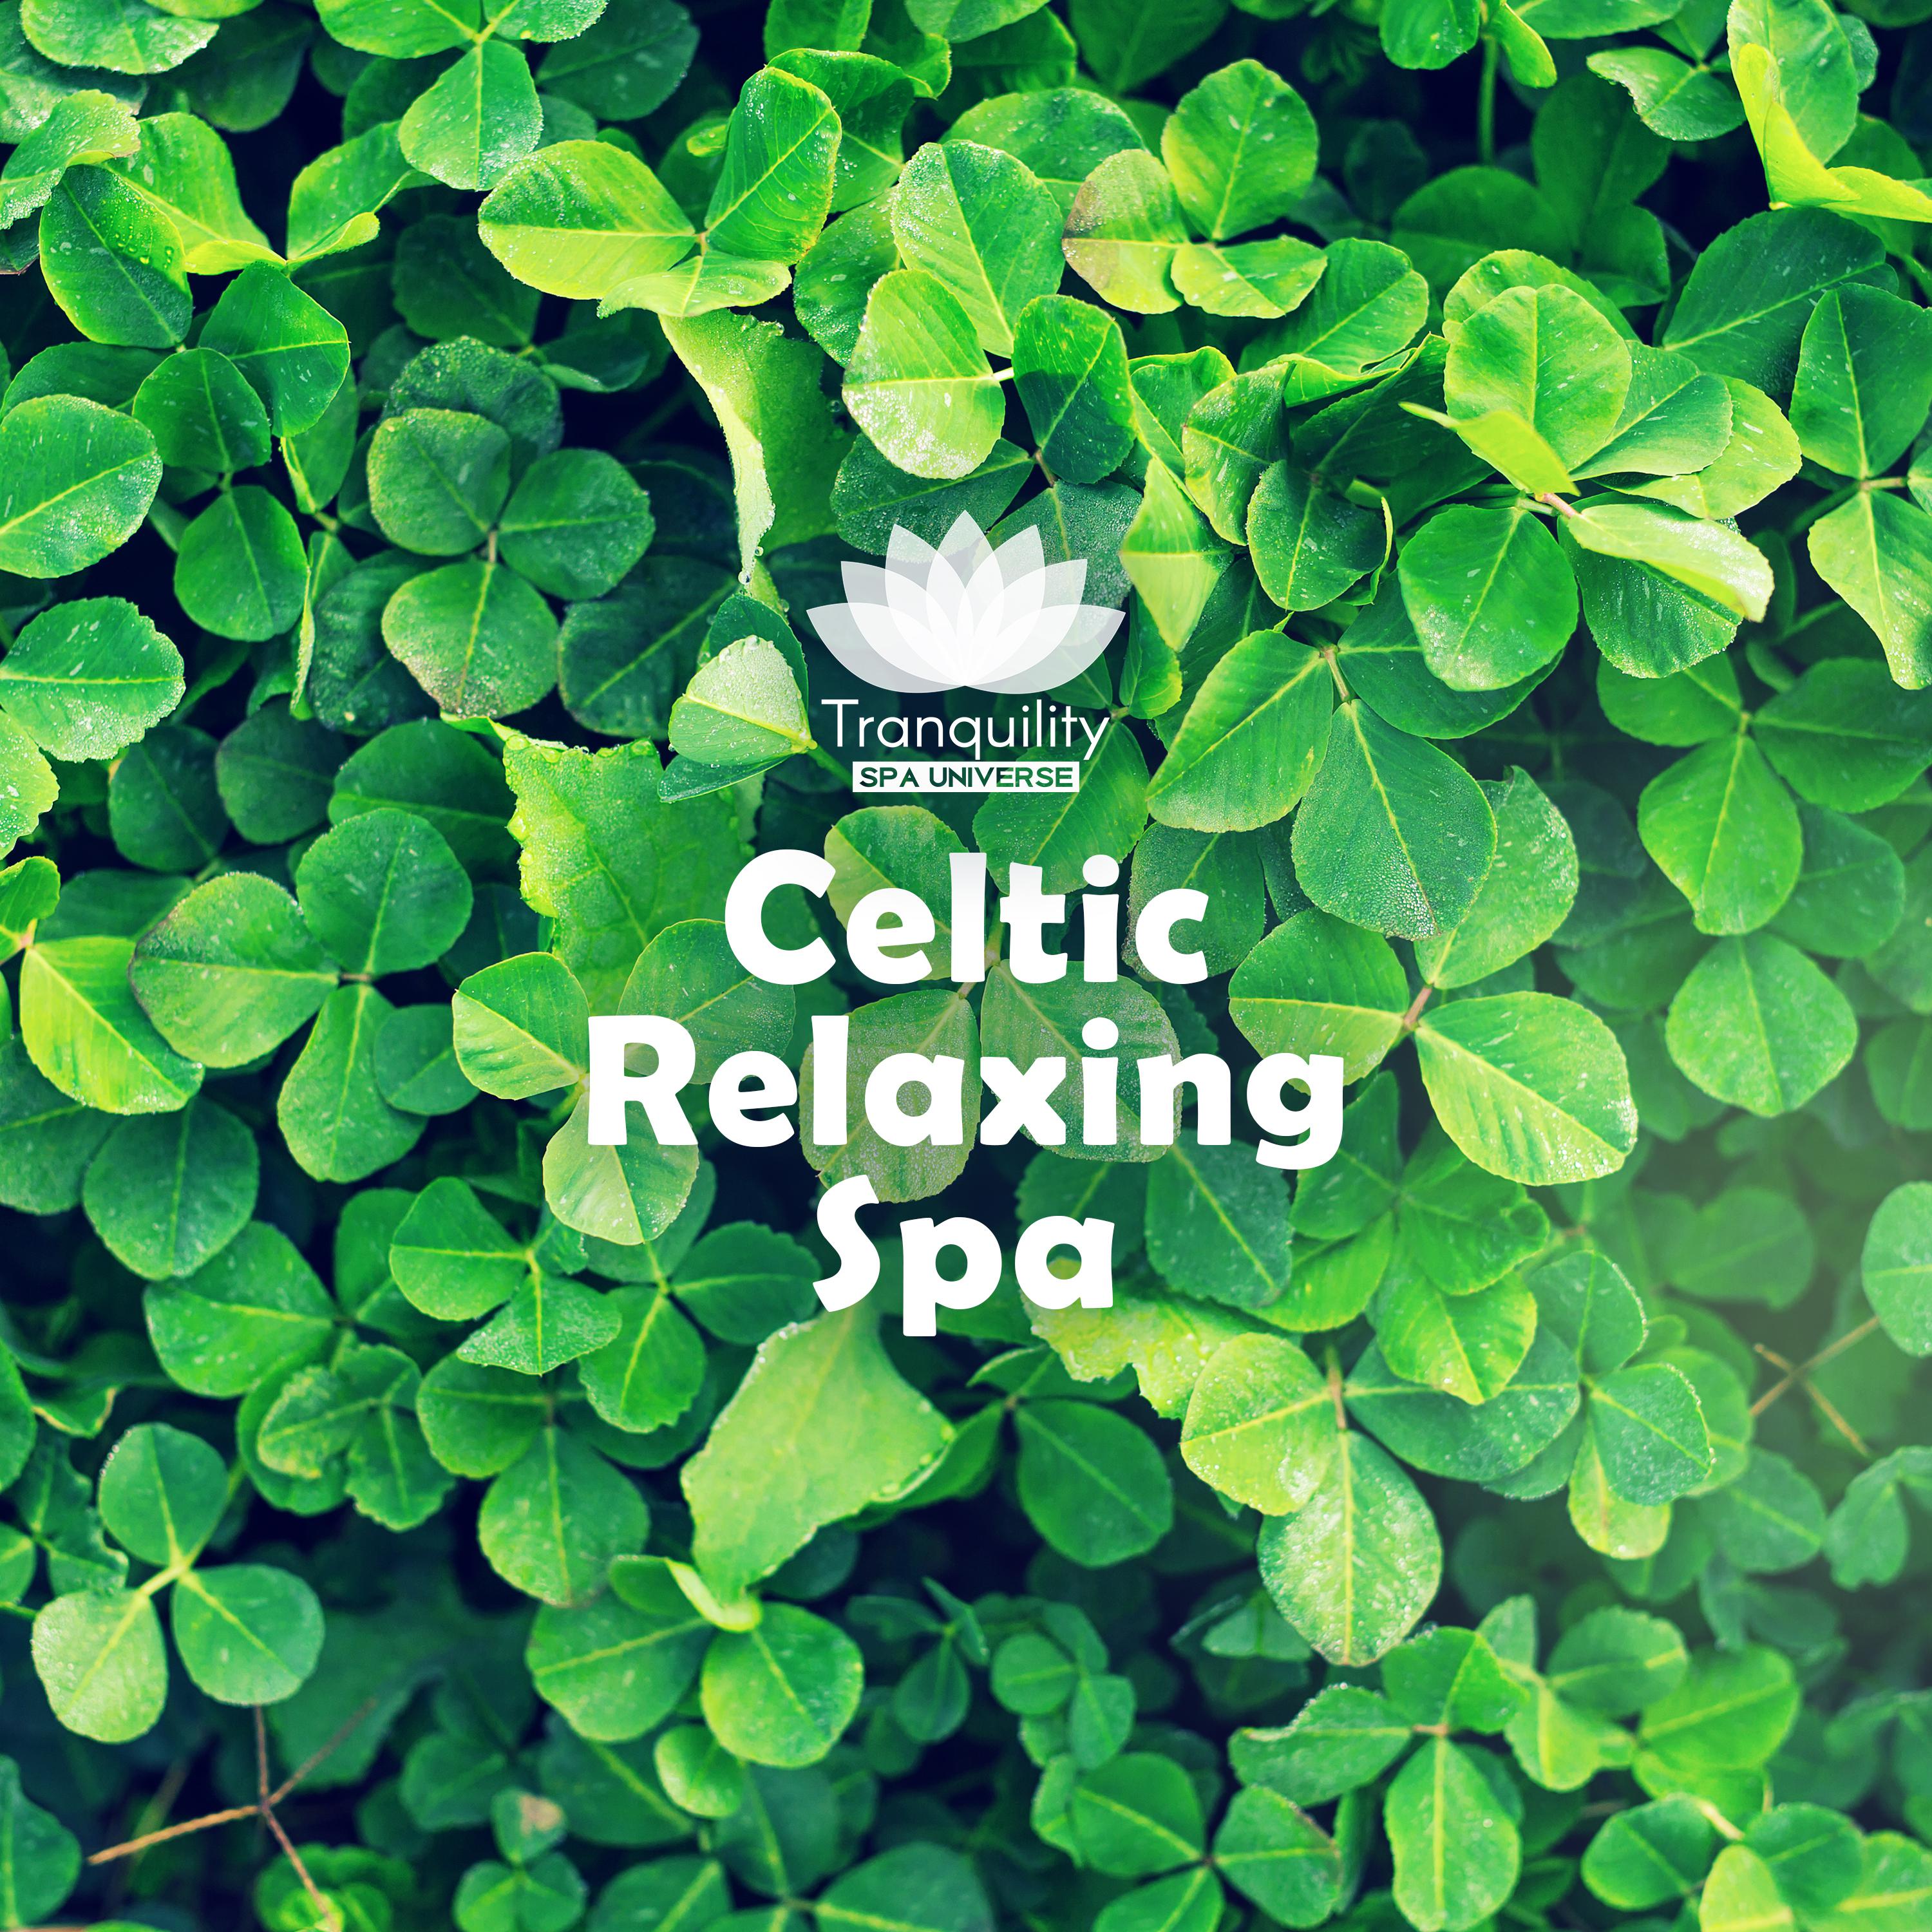 Celtic Relaxing Spa (Irish Harp & Flute for Well Being, Inner Peace, Relaxation)